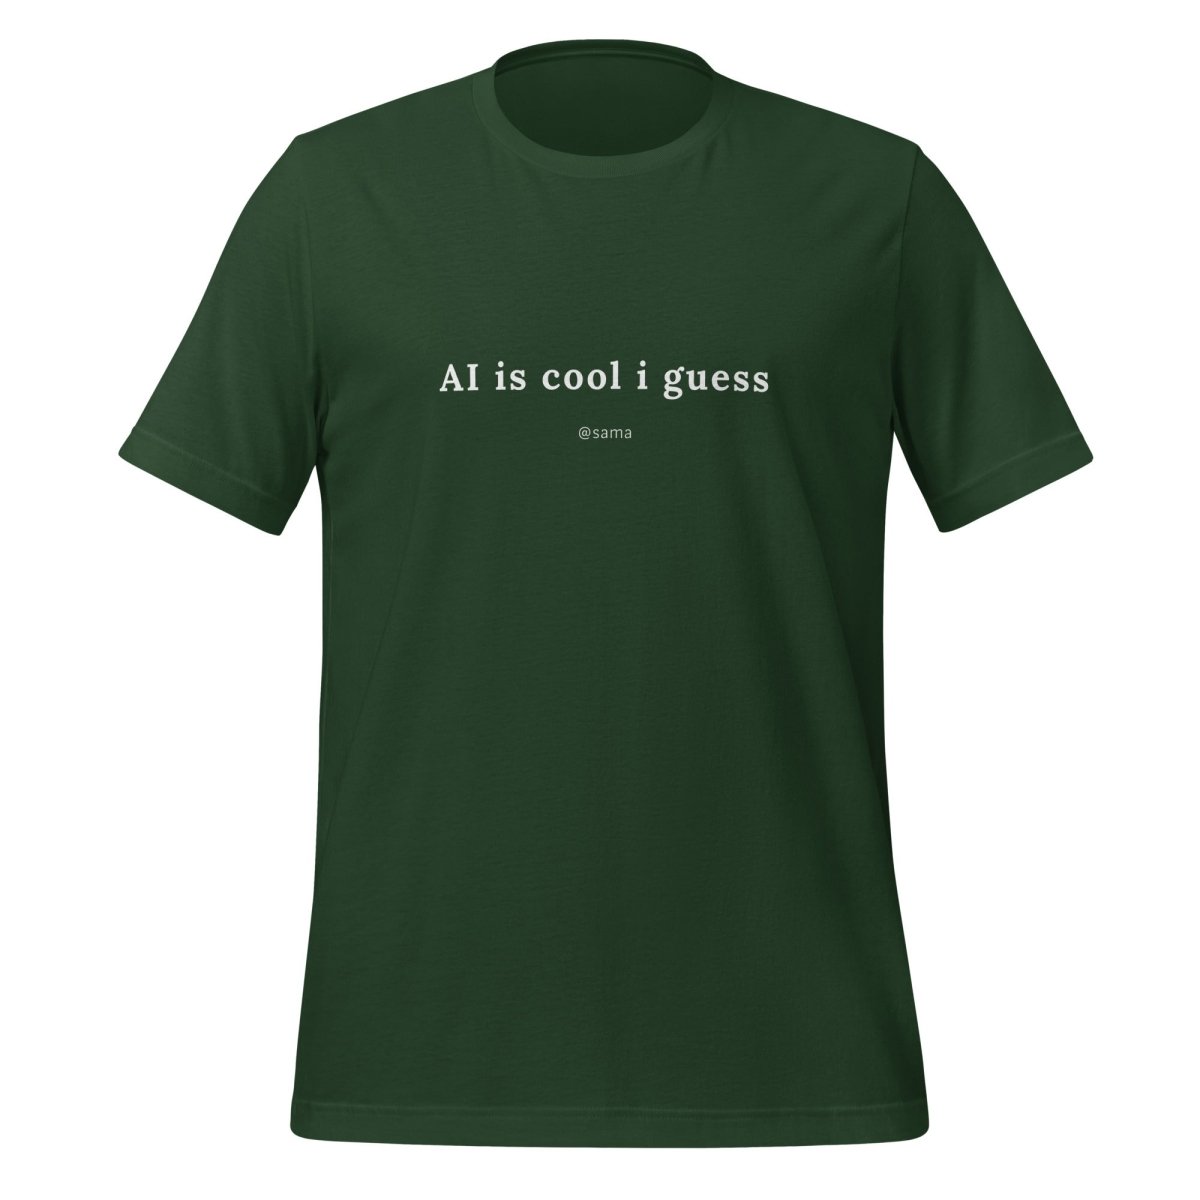 AI is cool i guess [@sama] T - Shirt (unisex) - Forest - AI Store